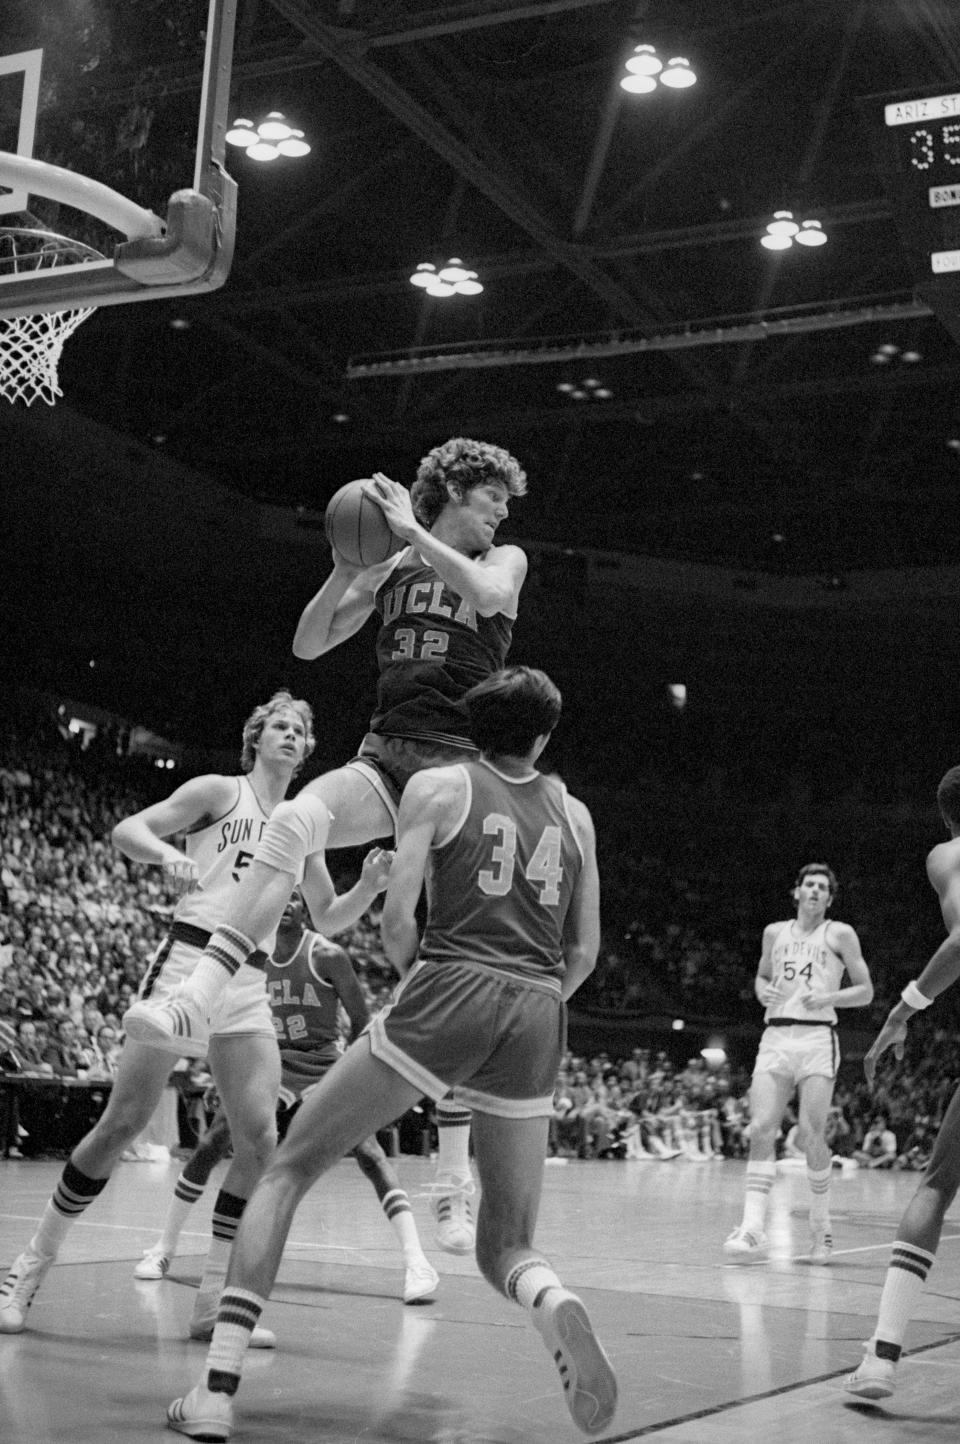 Original Caption: Westwood, Calif.: Red-haired Bill Walton, the reigning king of college basketball, goes high into the air to bring down a rebound during play against Arizona State. No. 1 ranked UCLA won the game 98-81 as Walton scored 26 points.